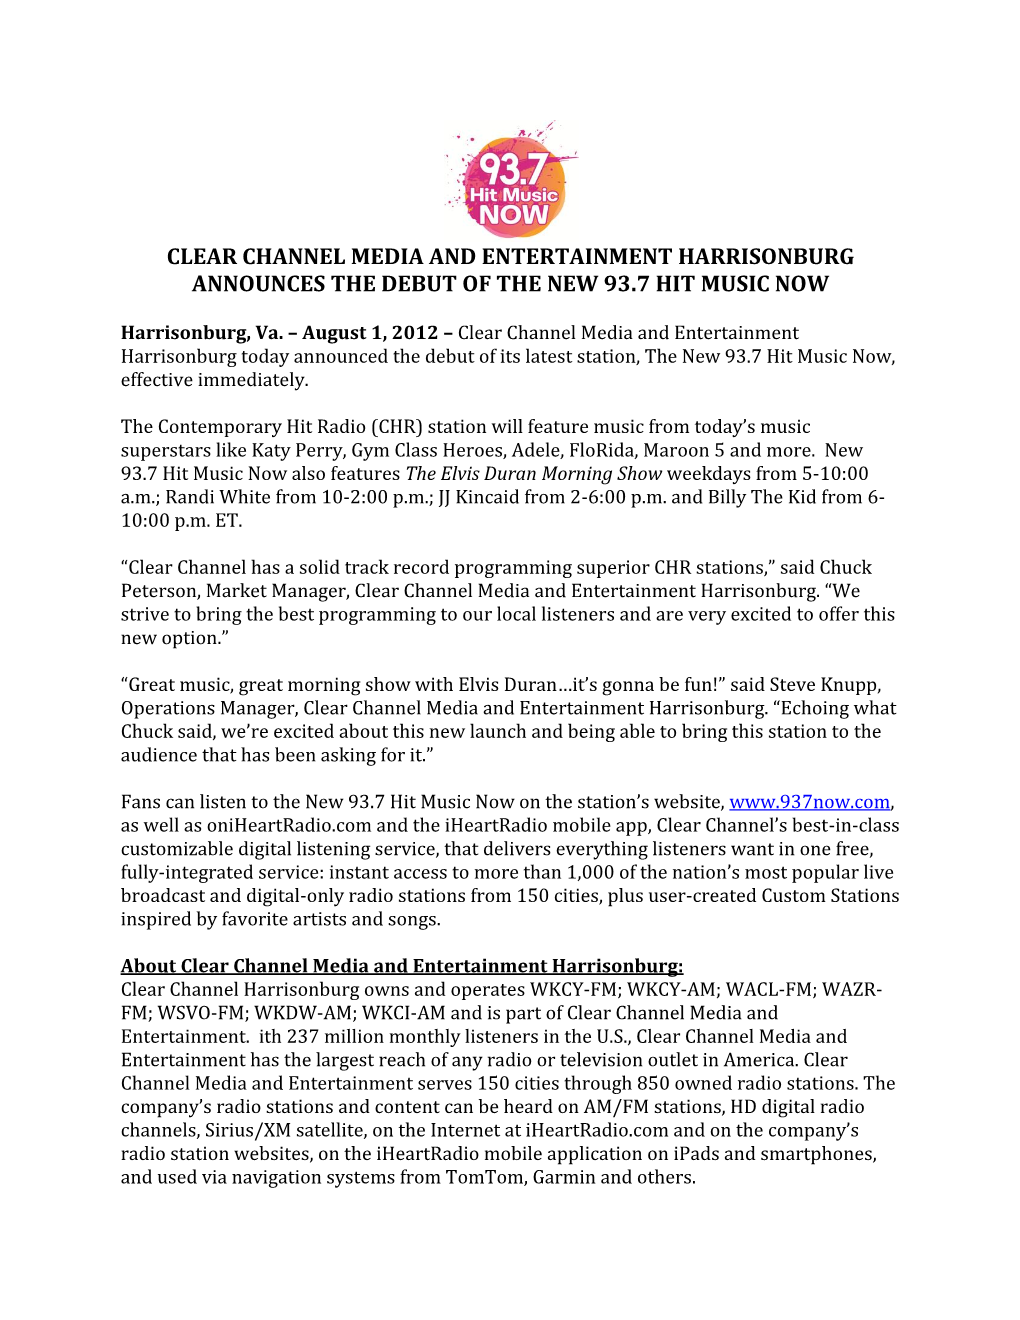 Clear Channel Media and Entertainment Harrisonburg Announces the Debut of the New 93.7 Hit Music Now